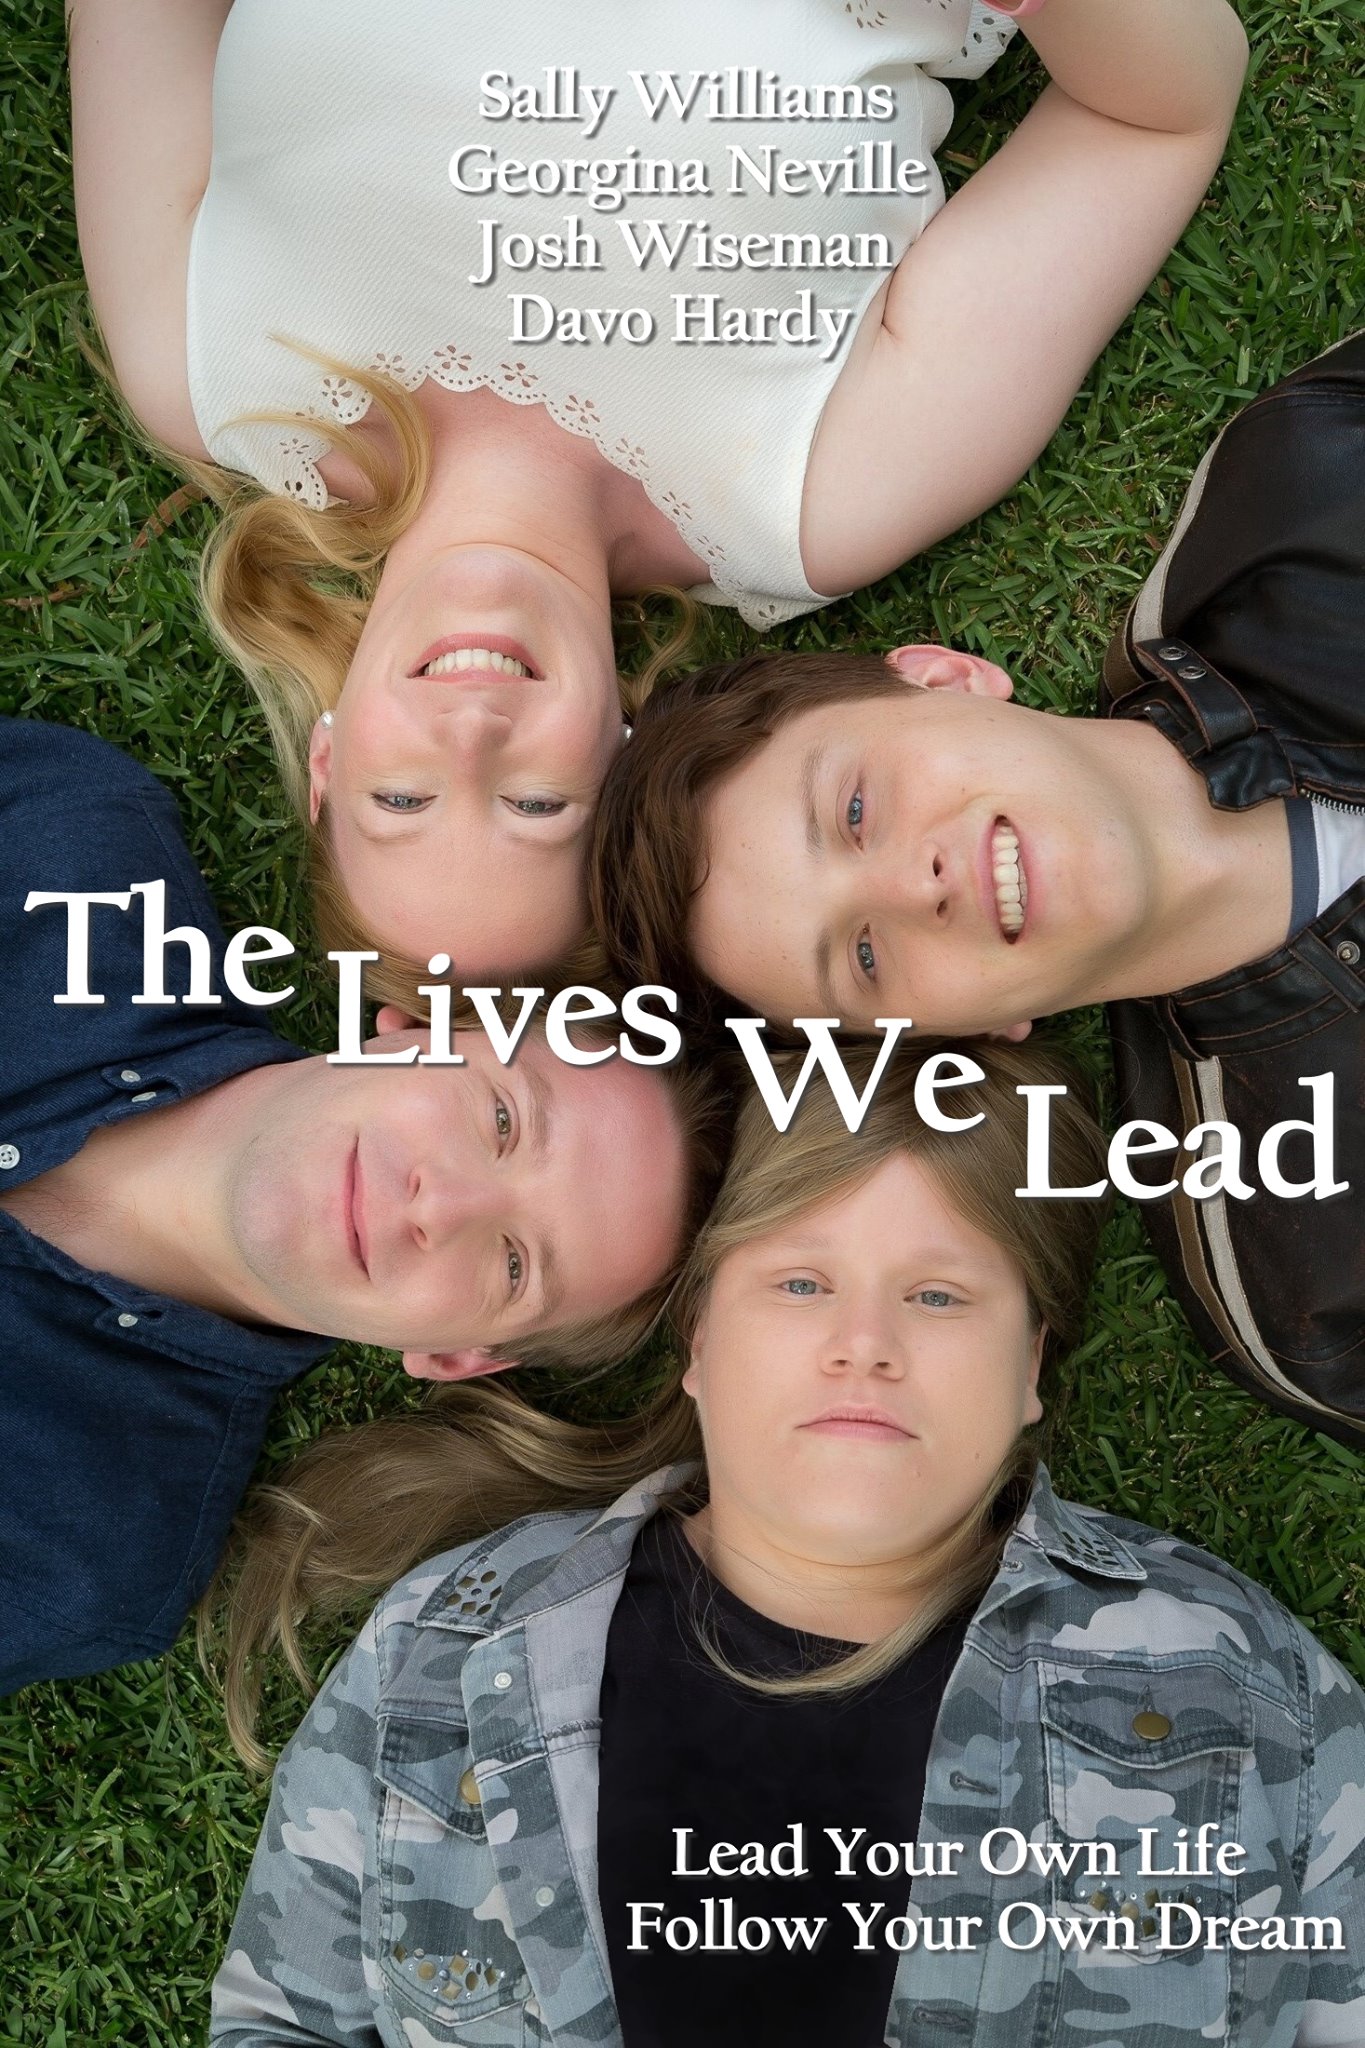 'The Lives We Lead' promotional poster